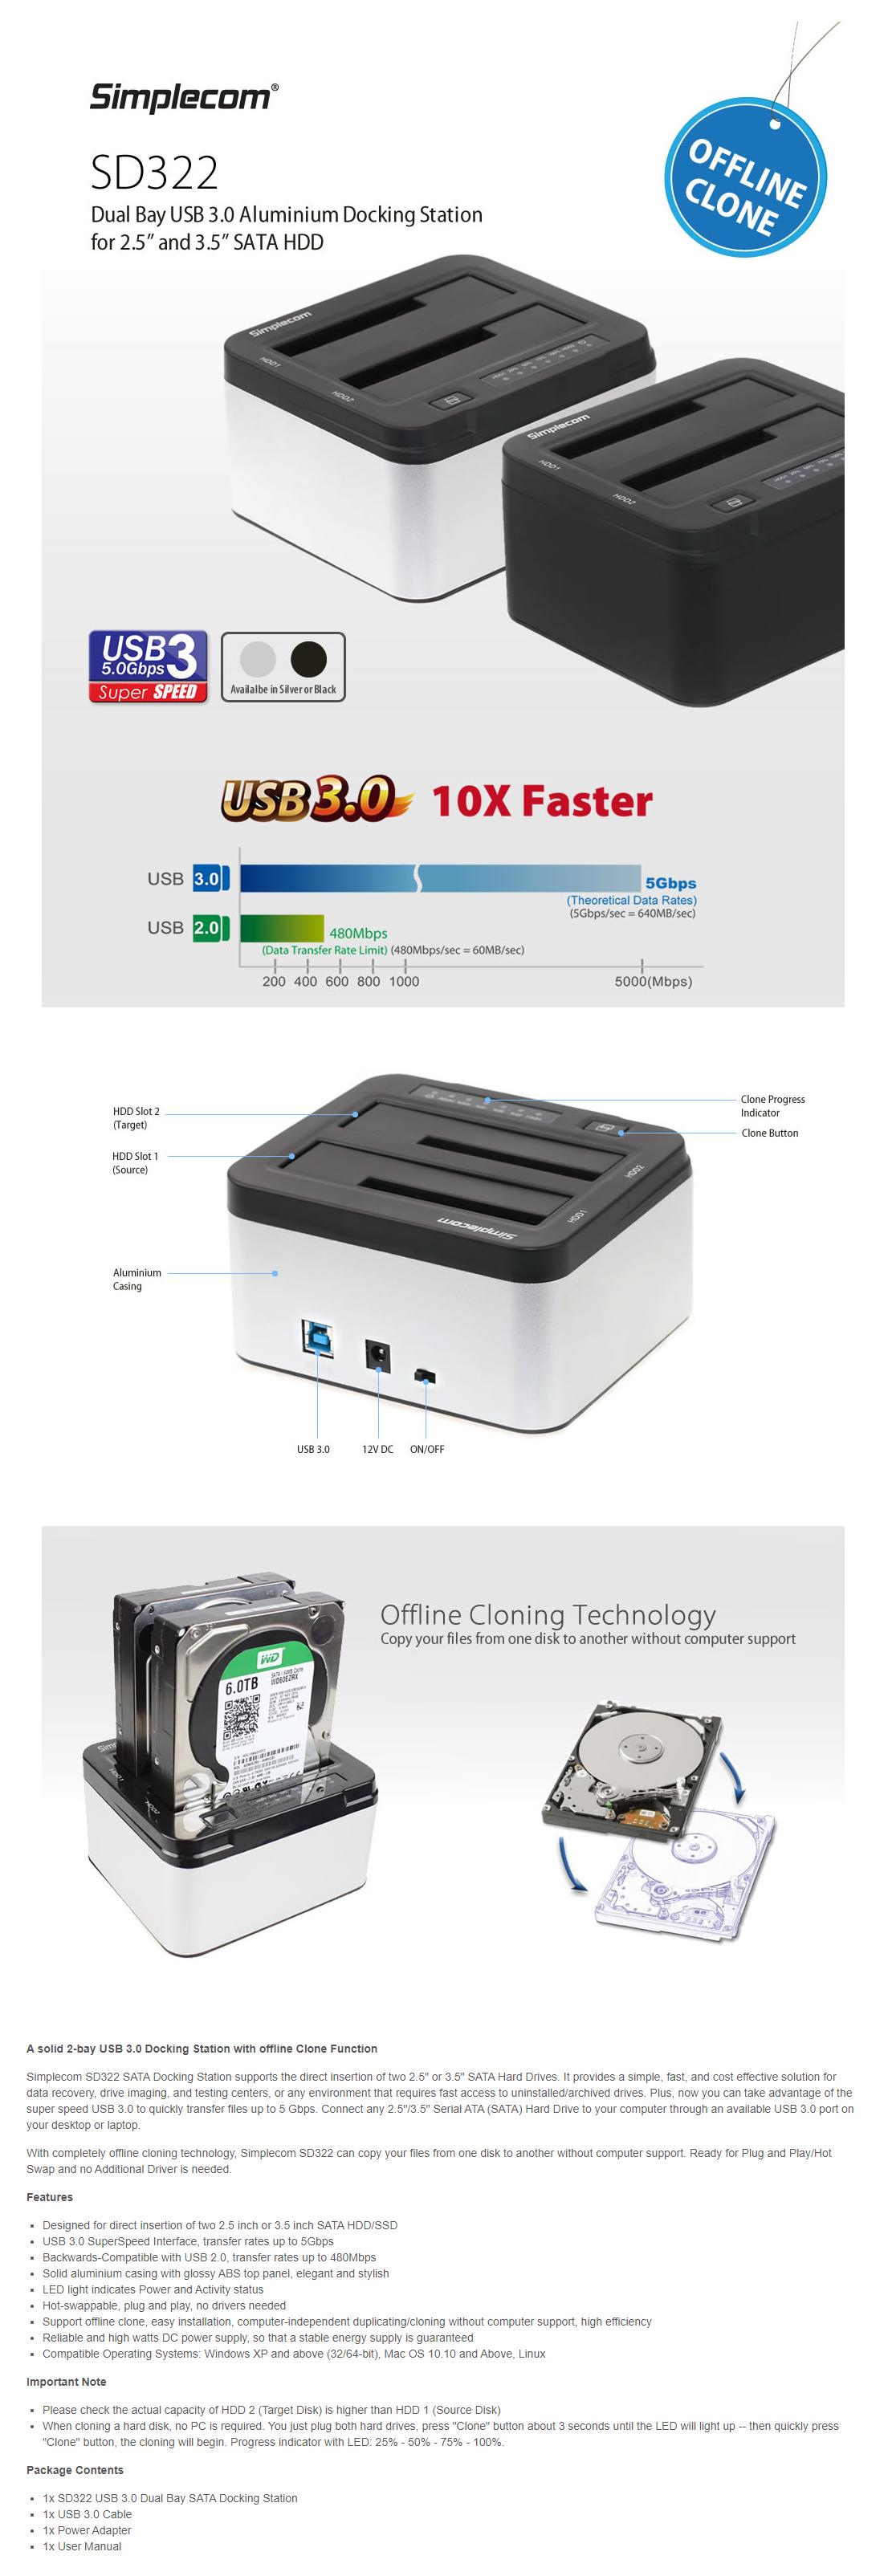 A large marketing image providing additional information about the product Simplecom SD322 Dual Bay USB 3.0 Aluminium Docking Station - Black - Additional alt info not provided